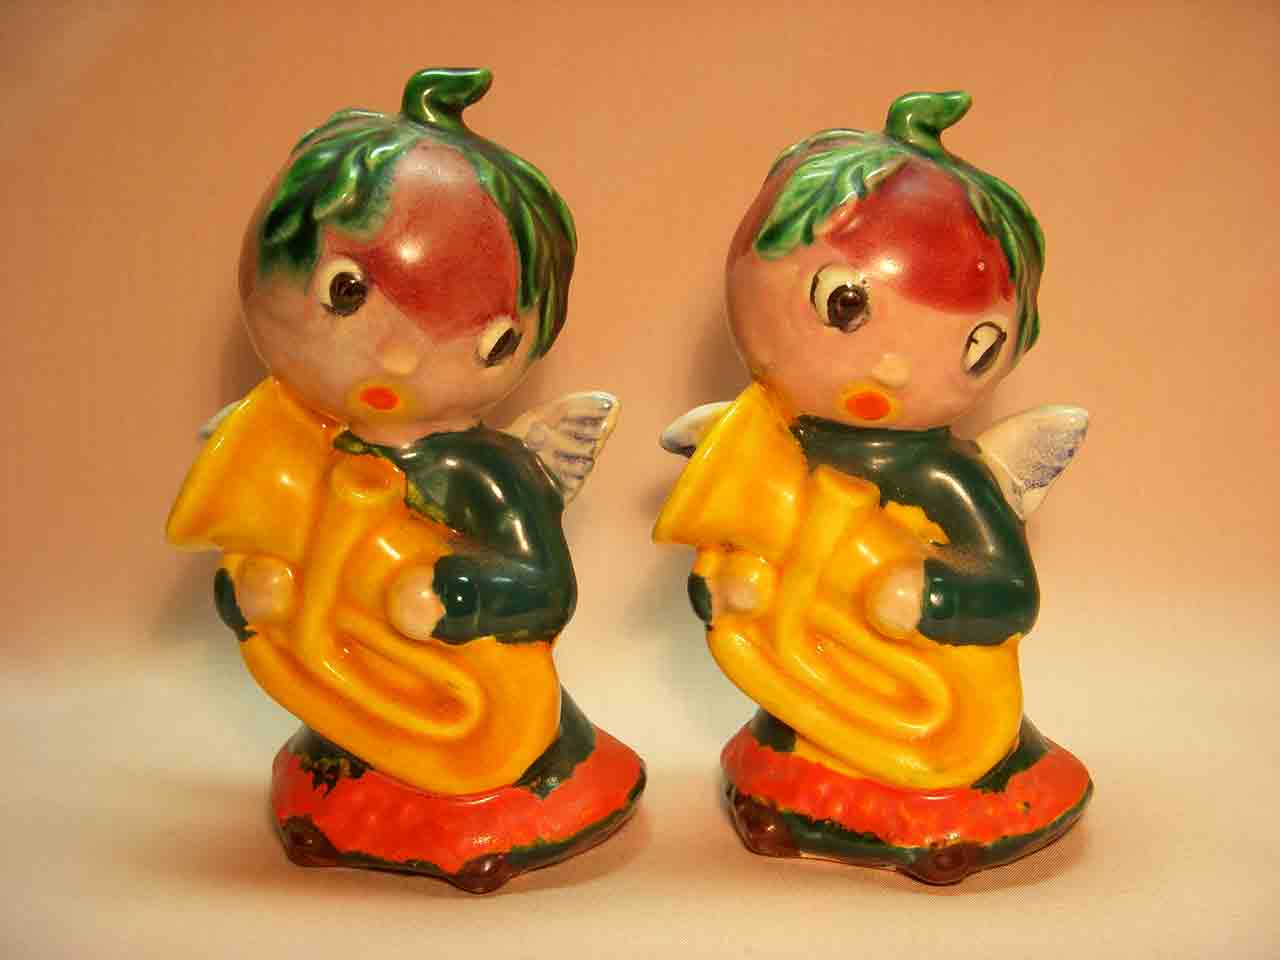 Anthropomorphic beets playing tuba - Heavenly Music series - salt and pepper shakers